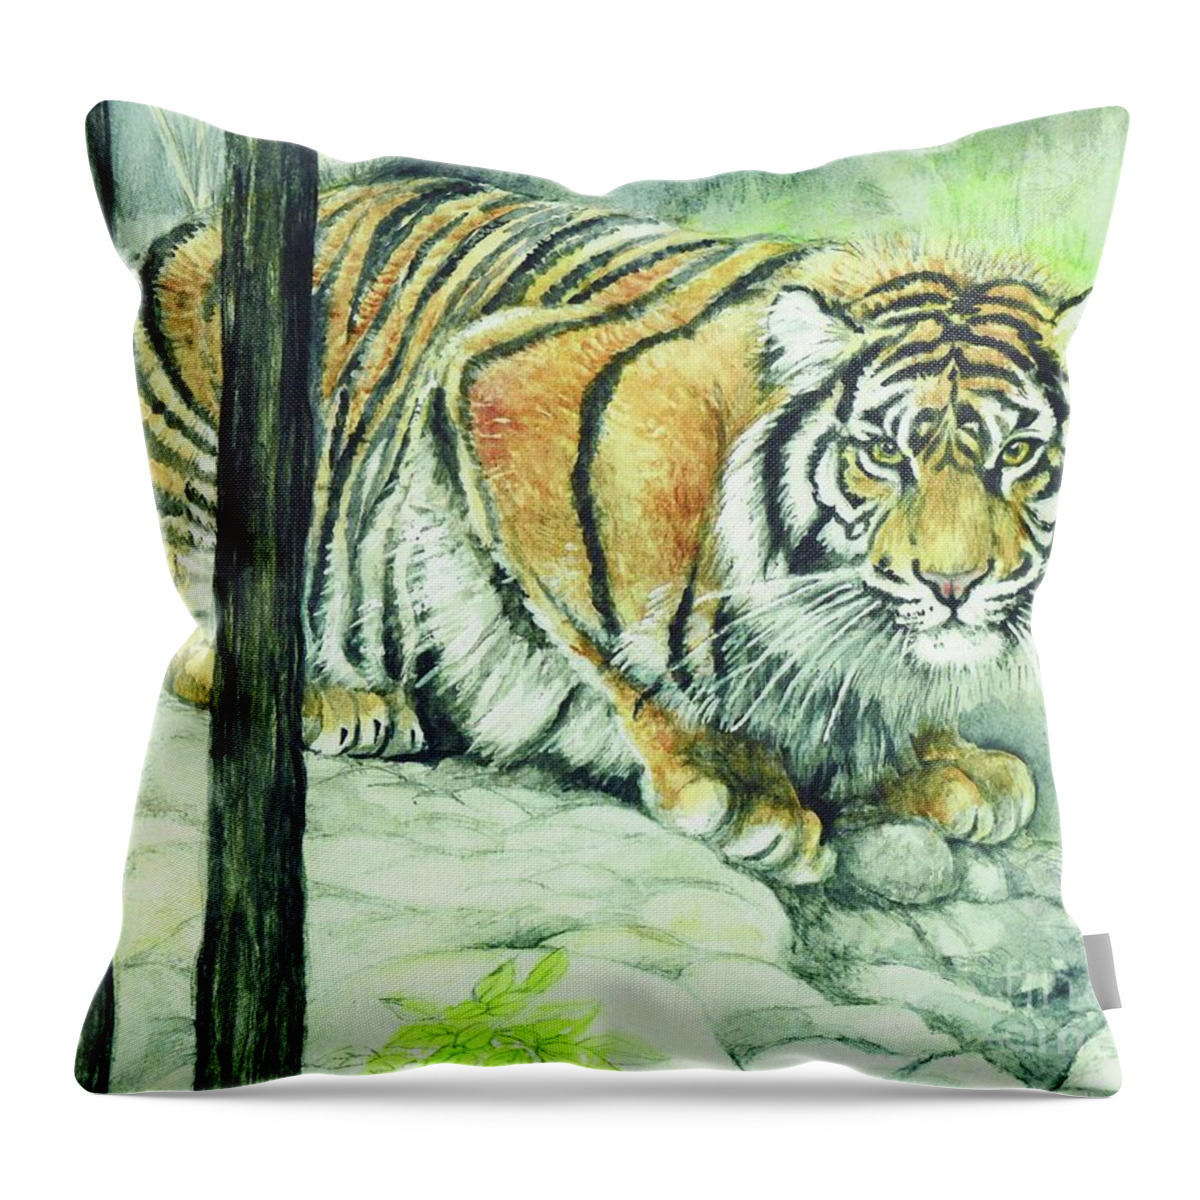 Crouching Throw Pillow featuring the painting Crouching Tiger by Morgan Fitzsimons